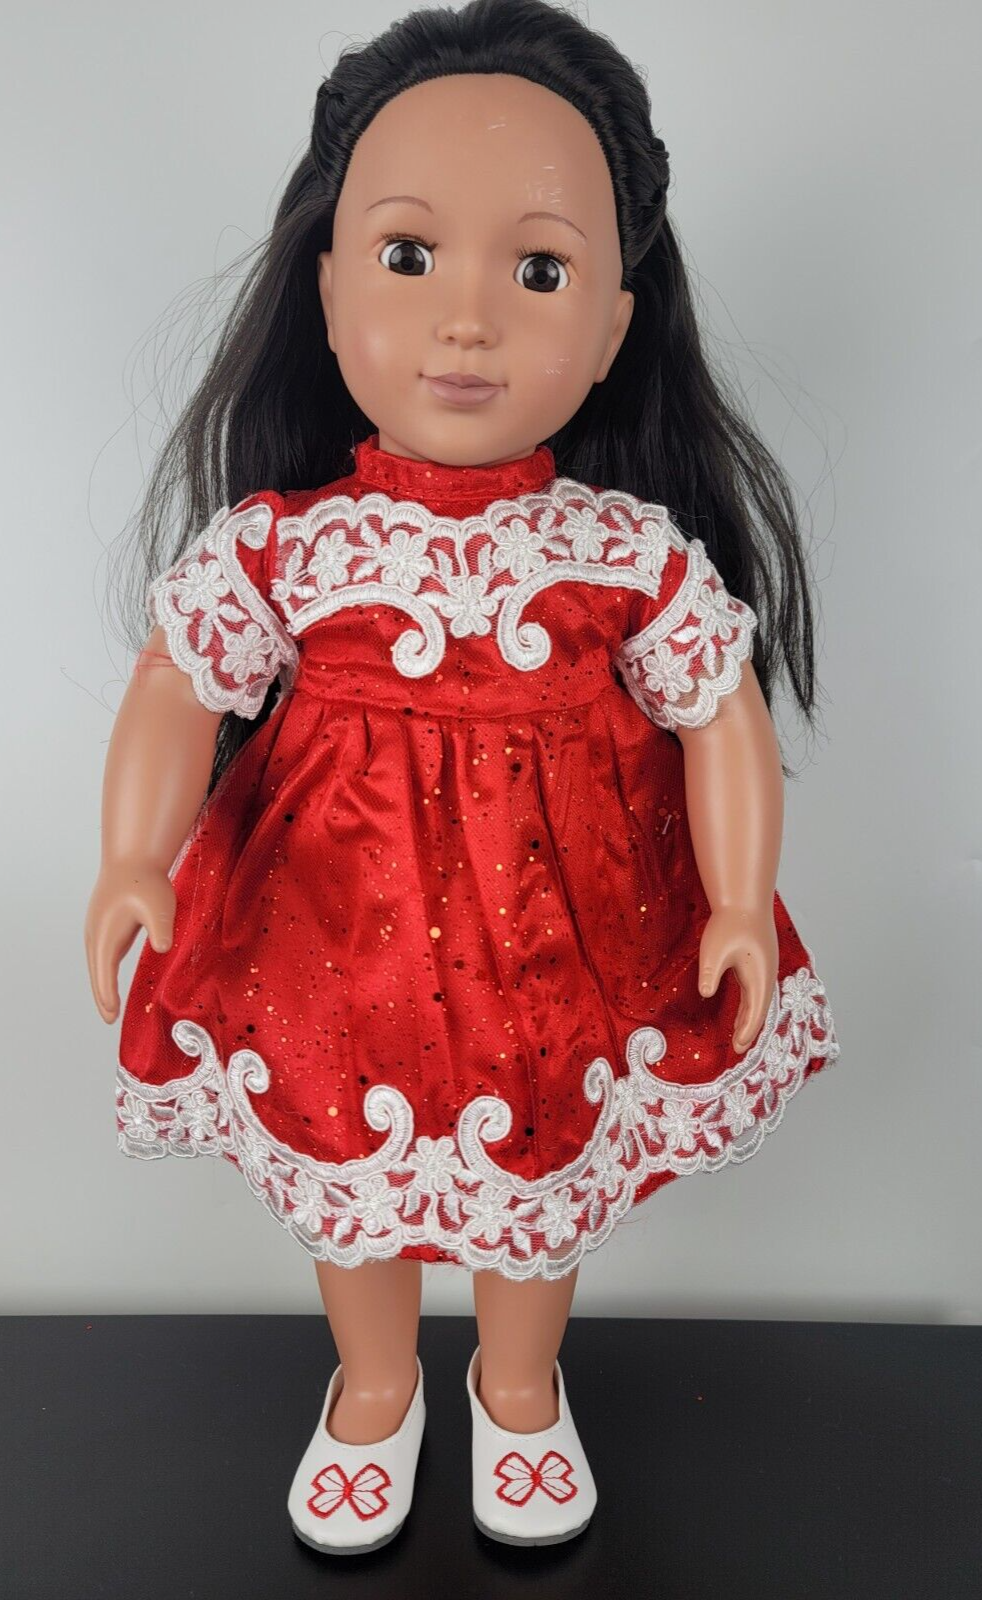 Primary image for Doll Dress Fancy Red Lace Glitter Bow Flats Outfit Holiday Fit American Girl 18"